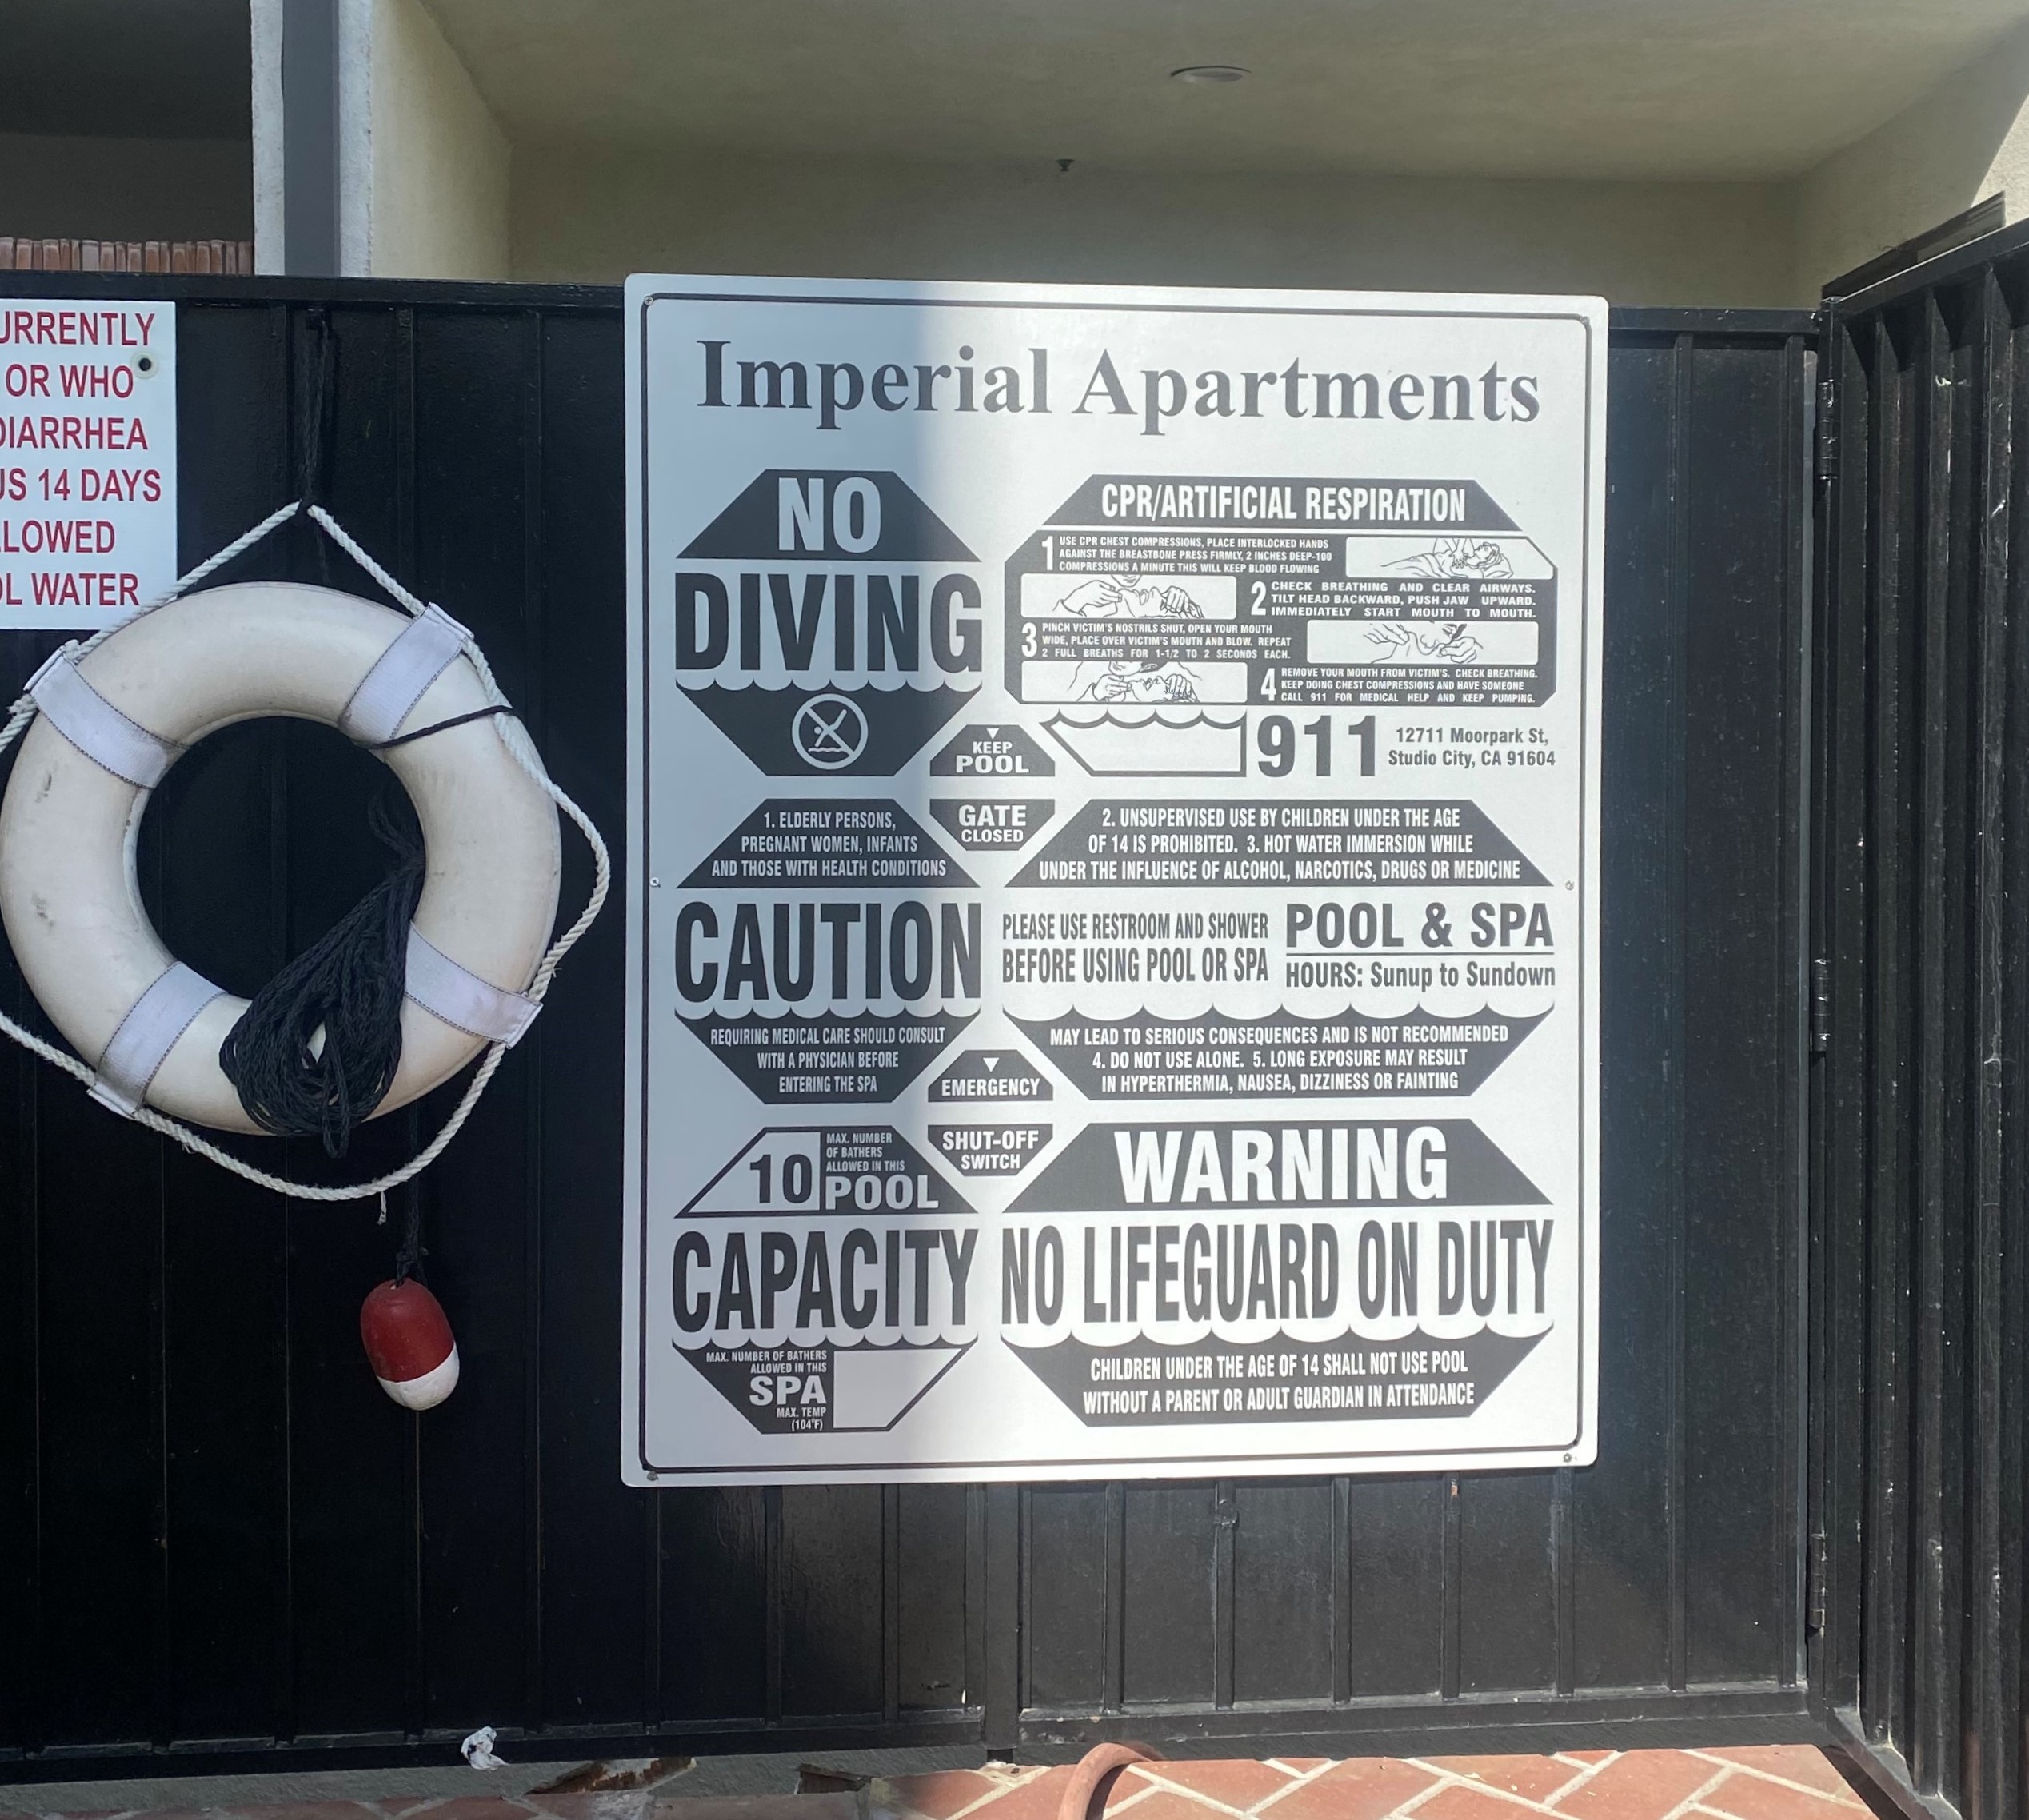 This safety sign for Imperial Apartments is a great addition that outlines the Do's and Don'ts of the location, as well as other crucial information.